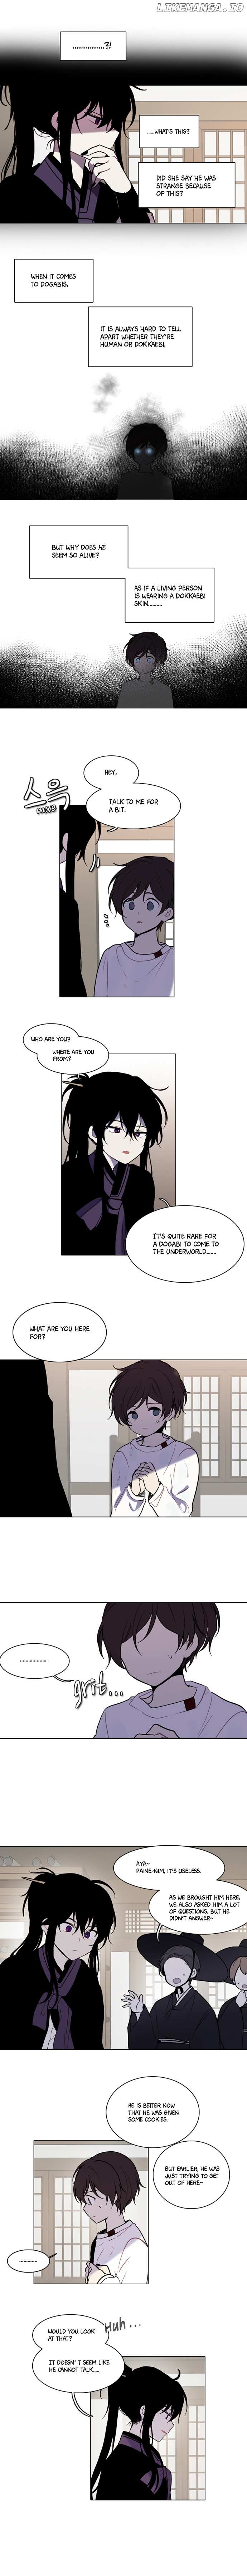 Whenever (Re) chapter 1 - page 7